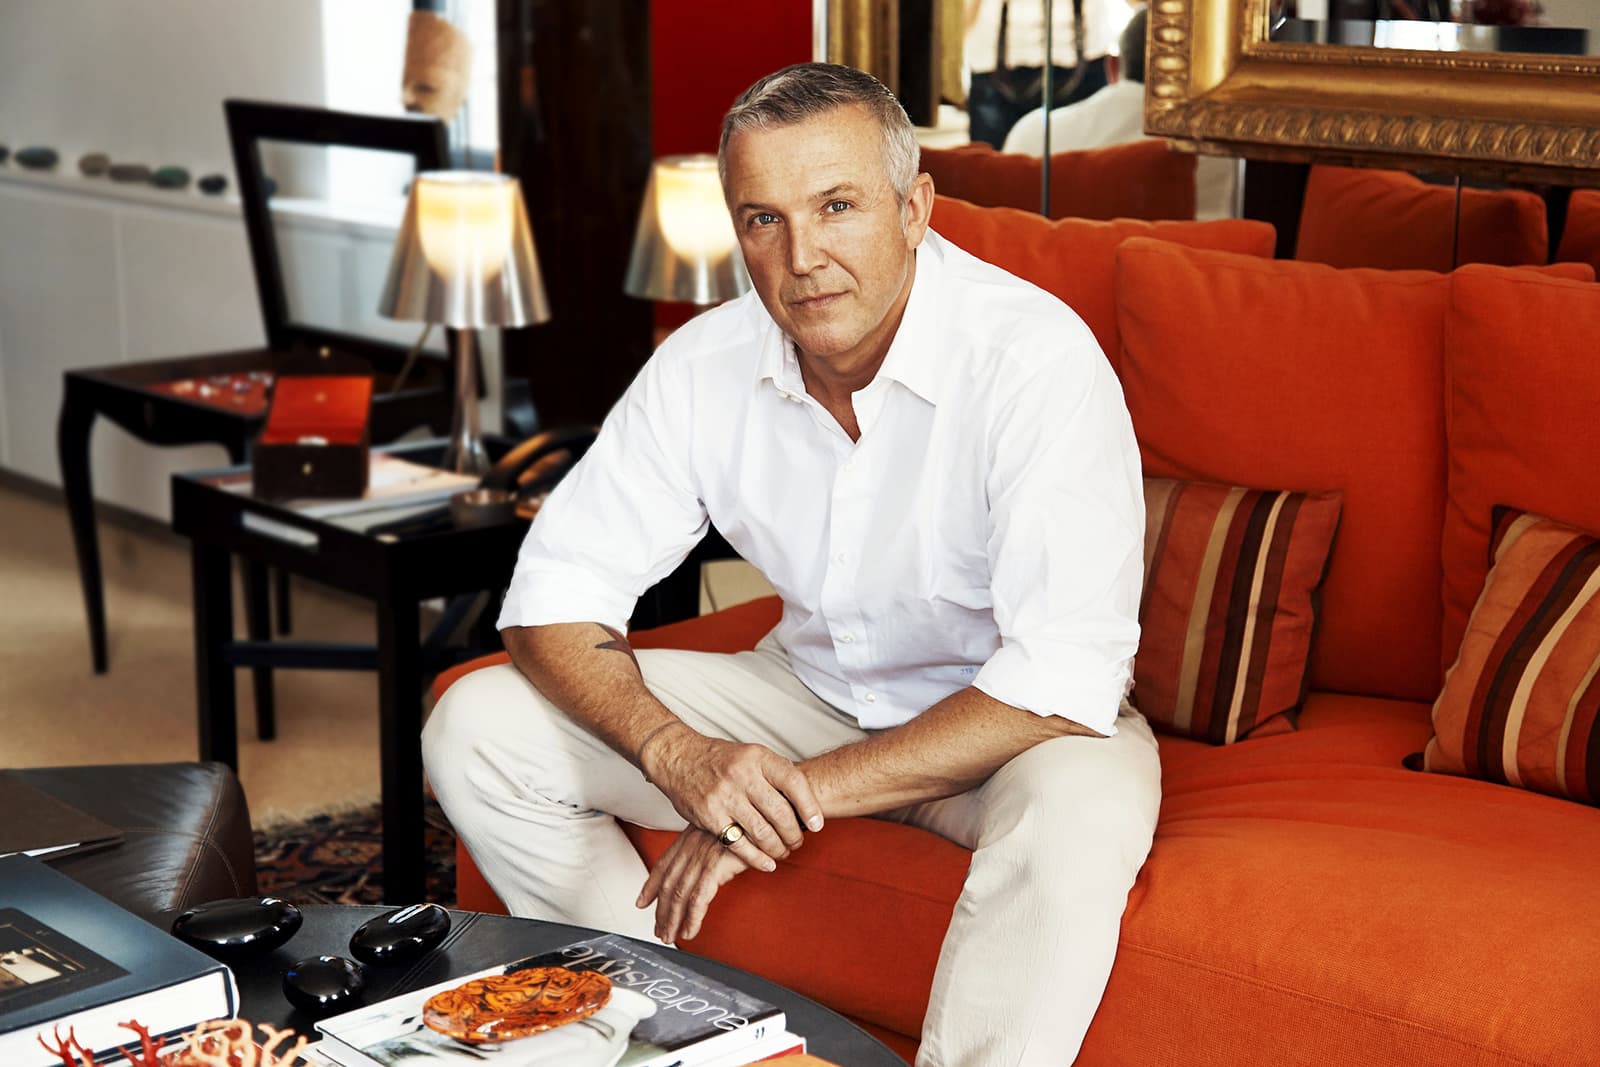 James Claude Taffin de Givenchy, founder of Taffin in his New York showroom. Image courtesy of Wall Street Journal